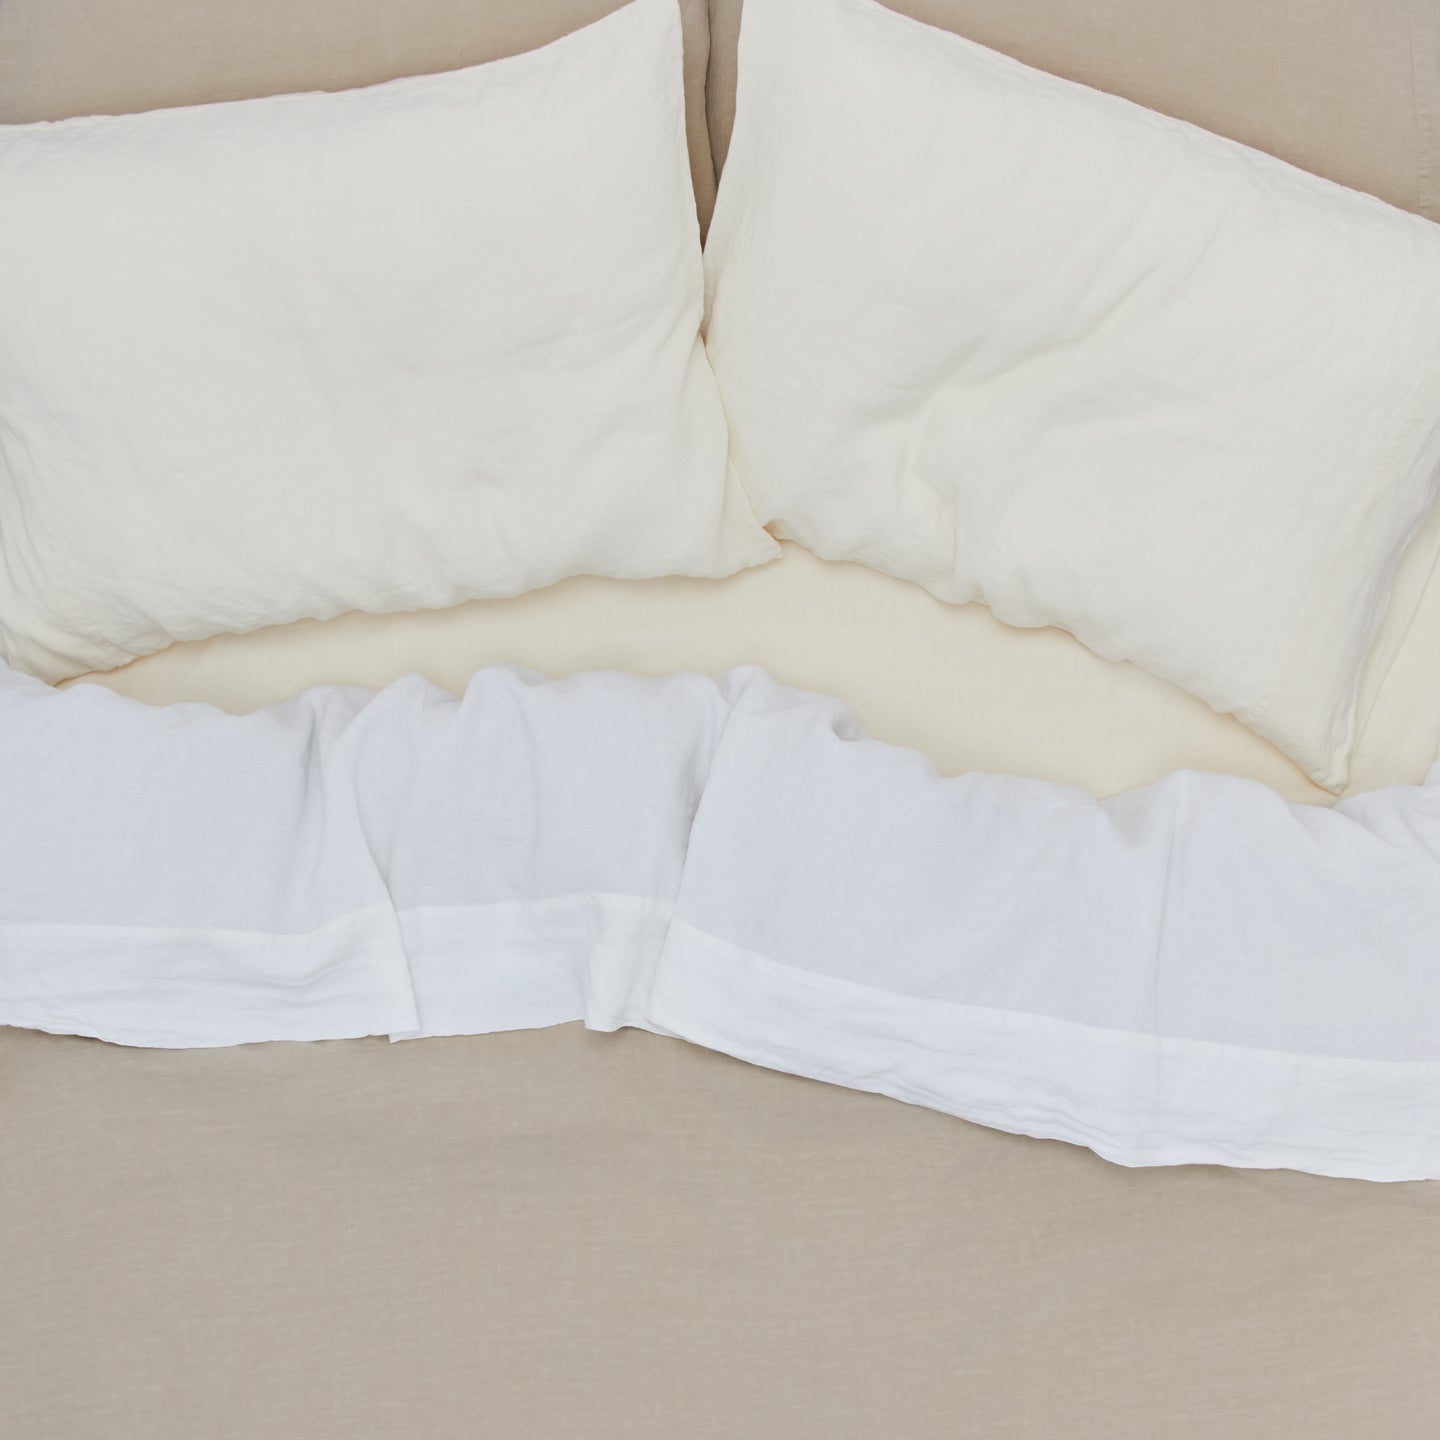 Simple Linen Pillowcases, Set of 2 - Ivory